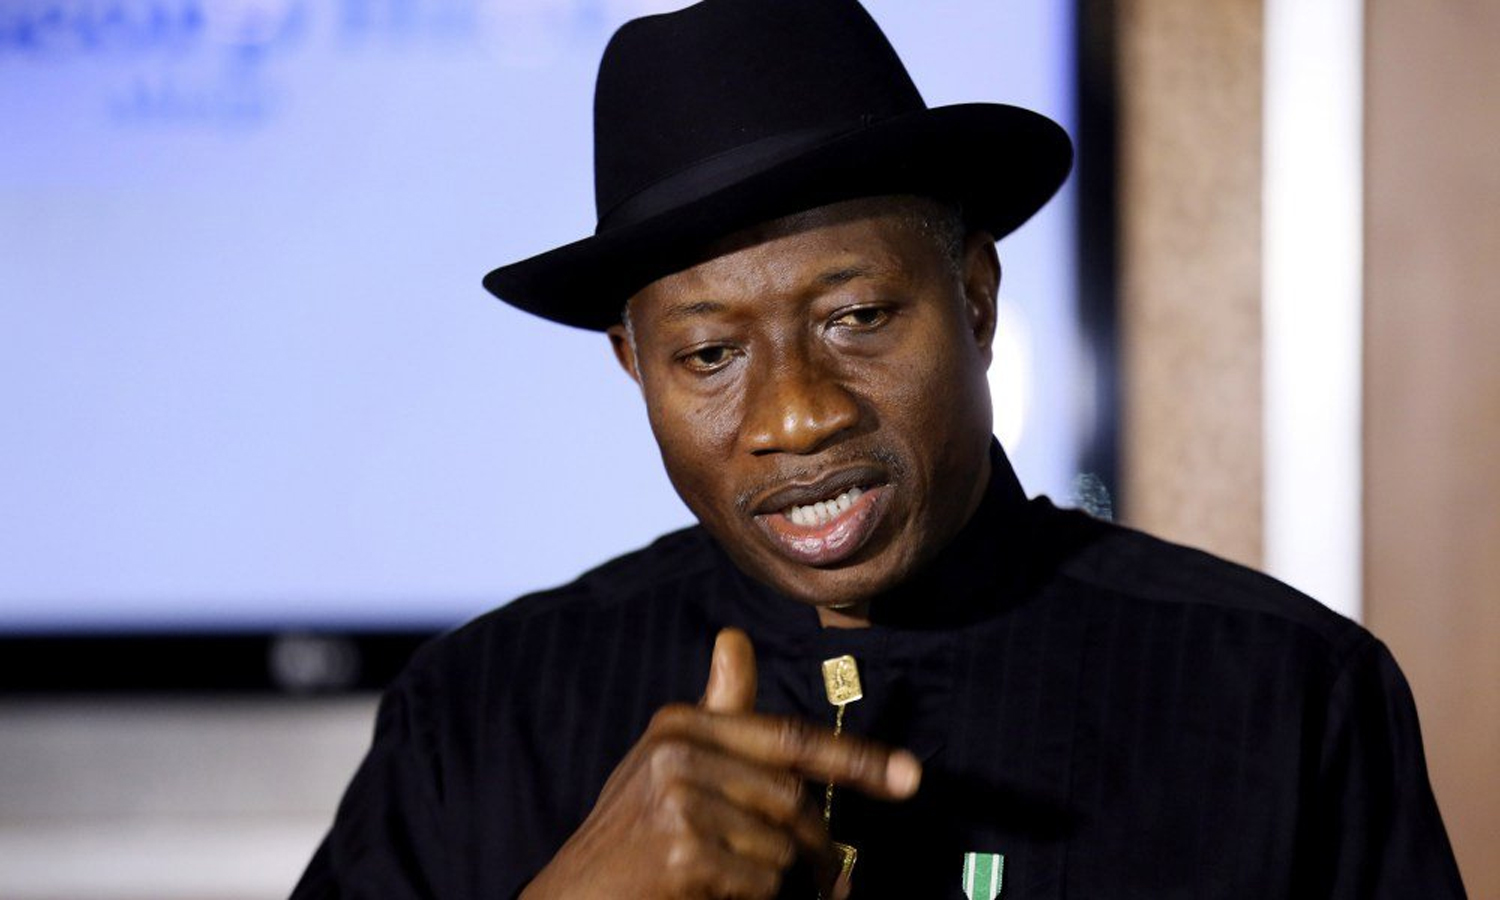 Jonathan speaks, gives reason he’s stepping away from active politics